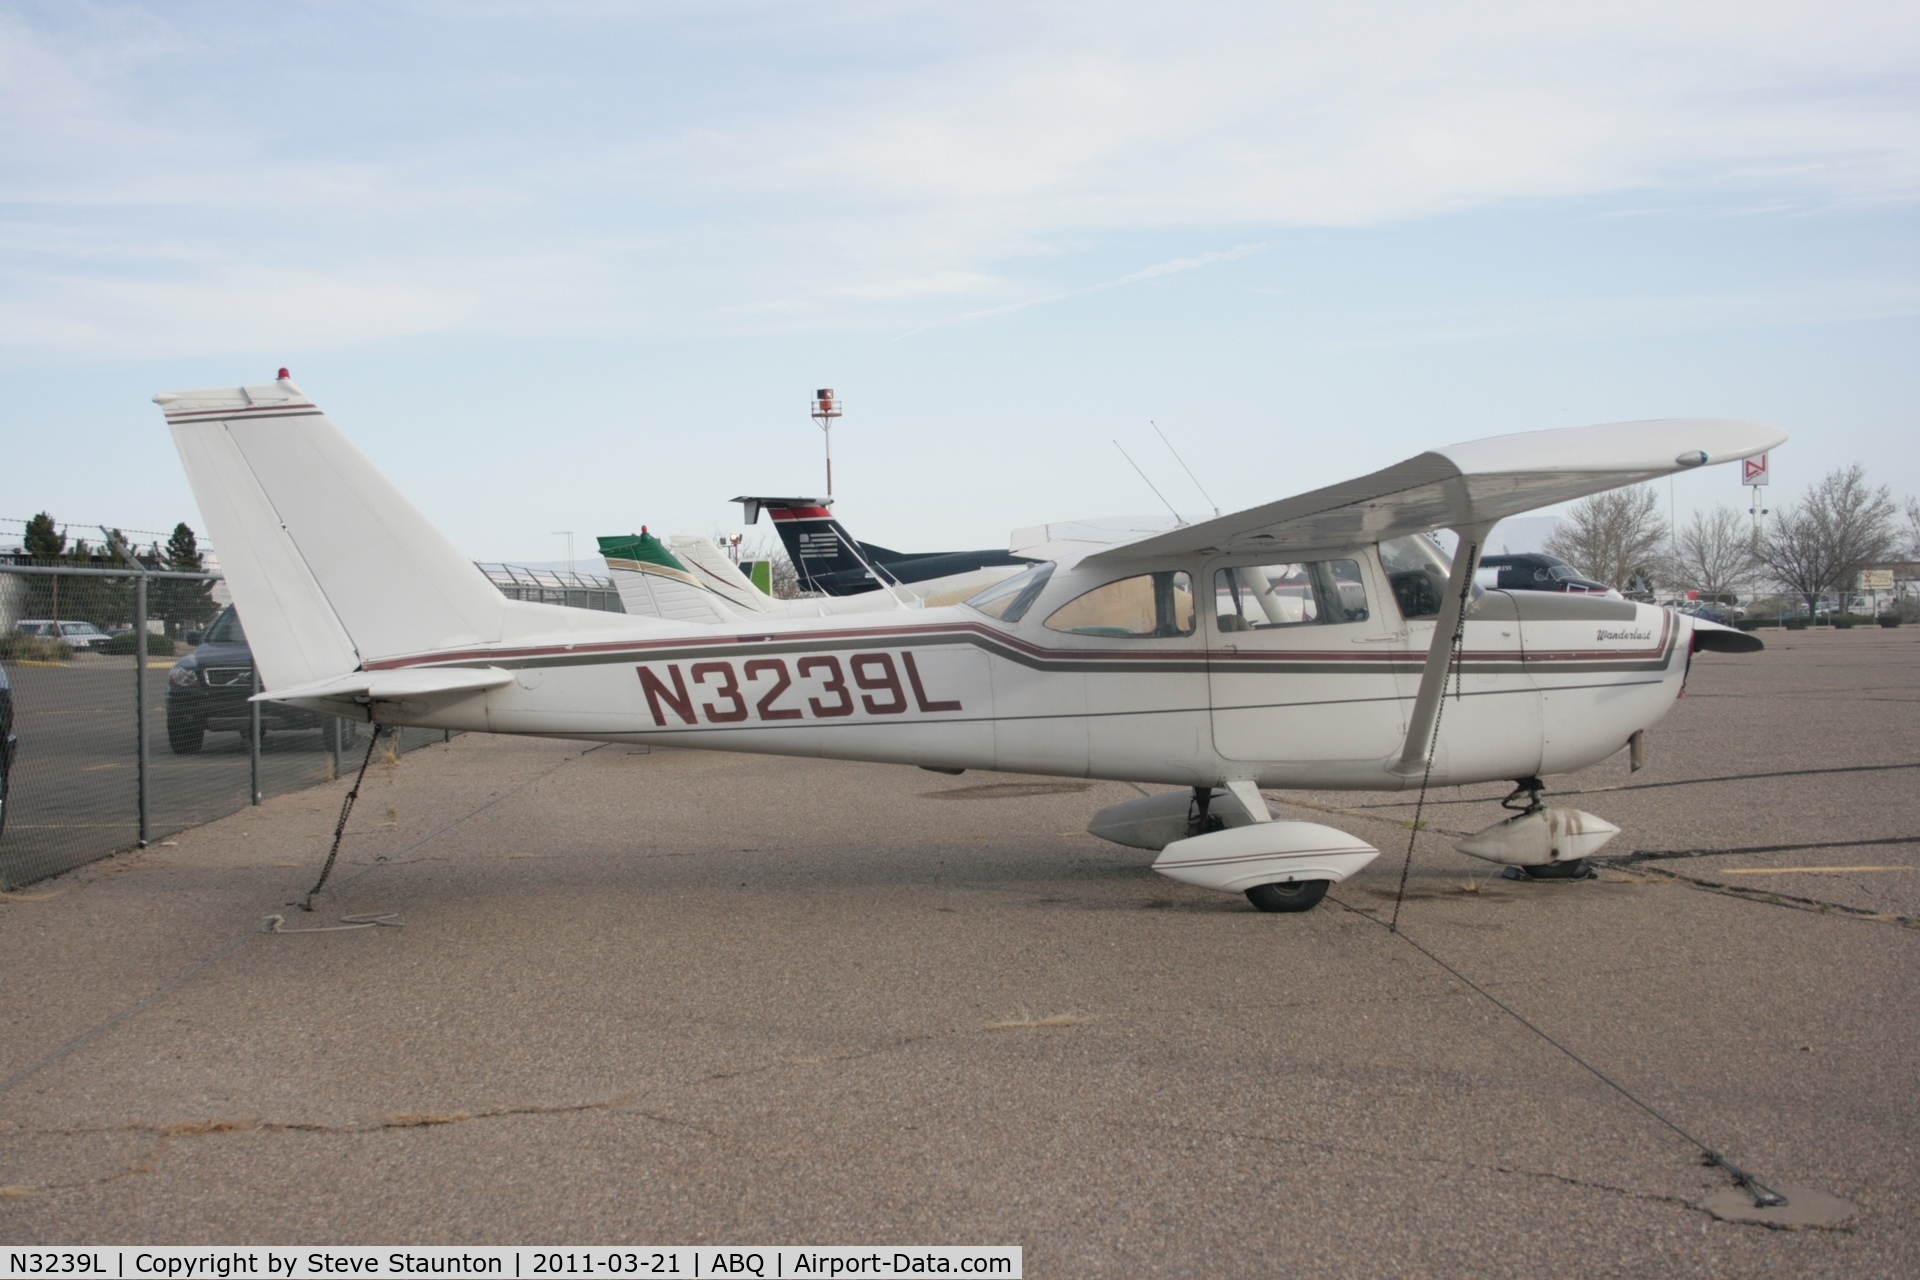 N3239L, 1967 Cessna 172H C/N 17256139, Taken at Alburquerque International Sunport Airport, New Mexico in March 2011 whilst on an Aeroprint Aviation tour